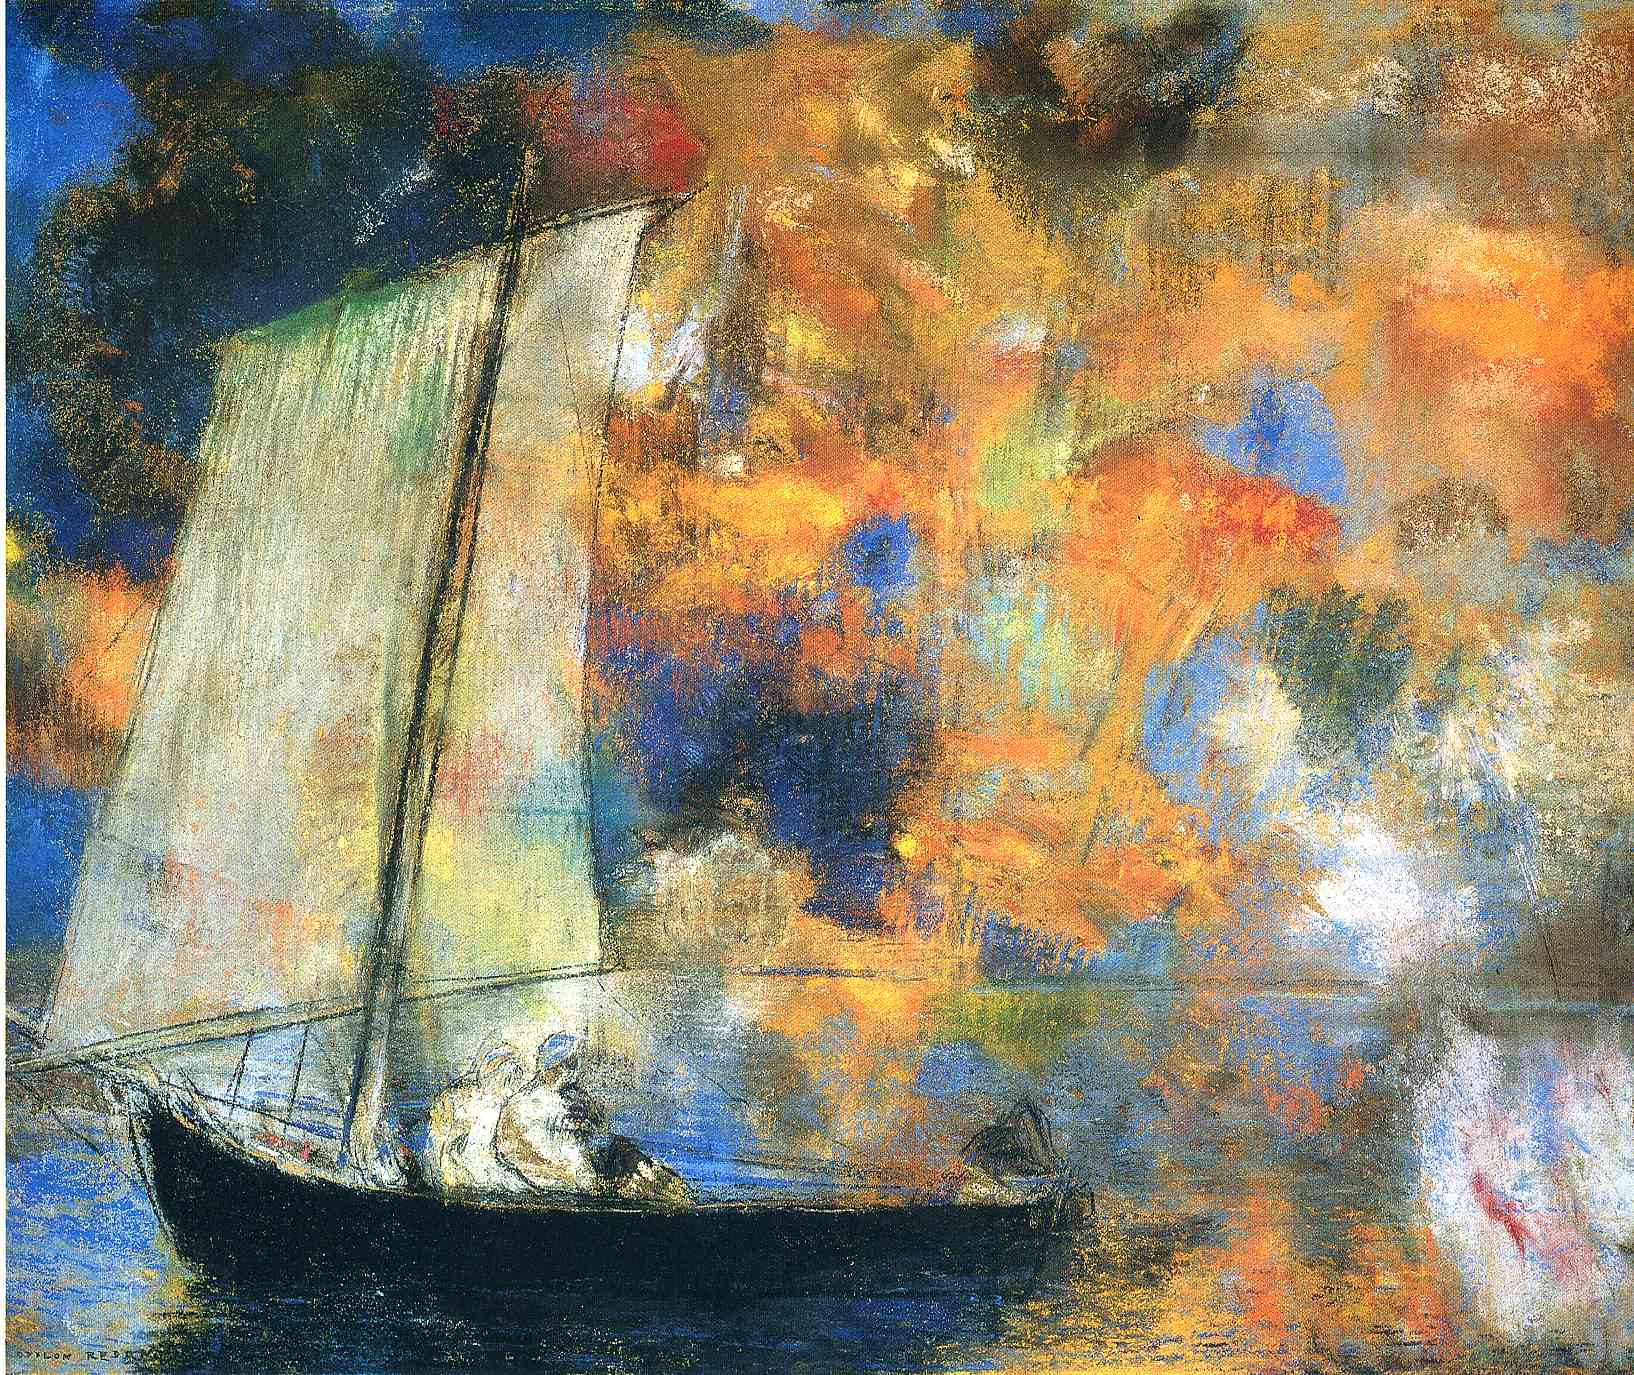 Flower Clouds by Odilon Redon - c. 1903 - 54.2 x 44.5 cm Art Institute of Chicago